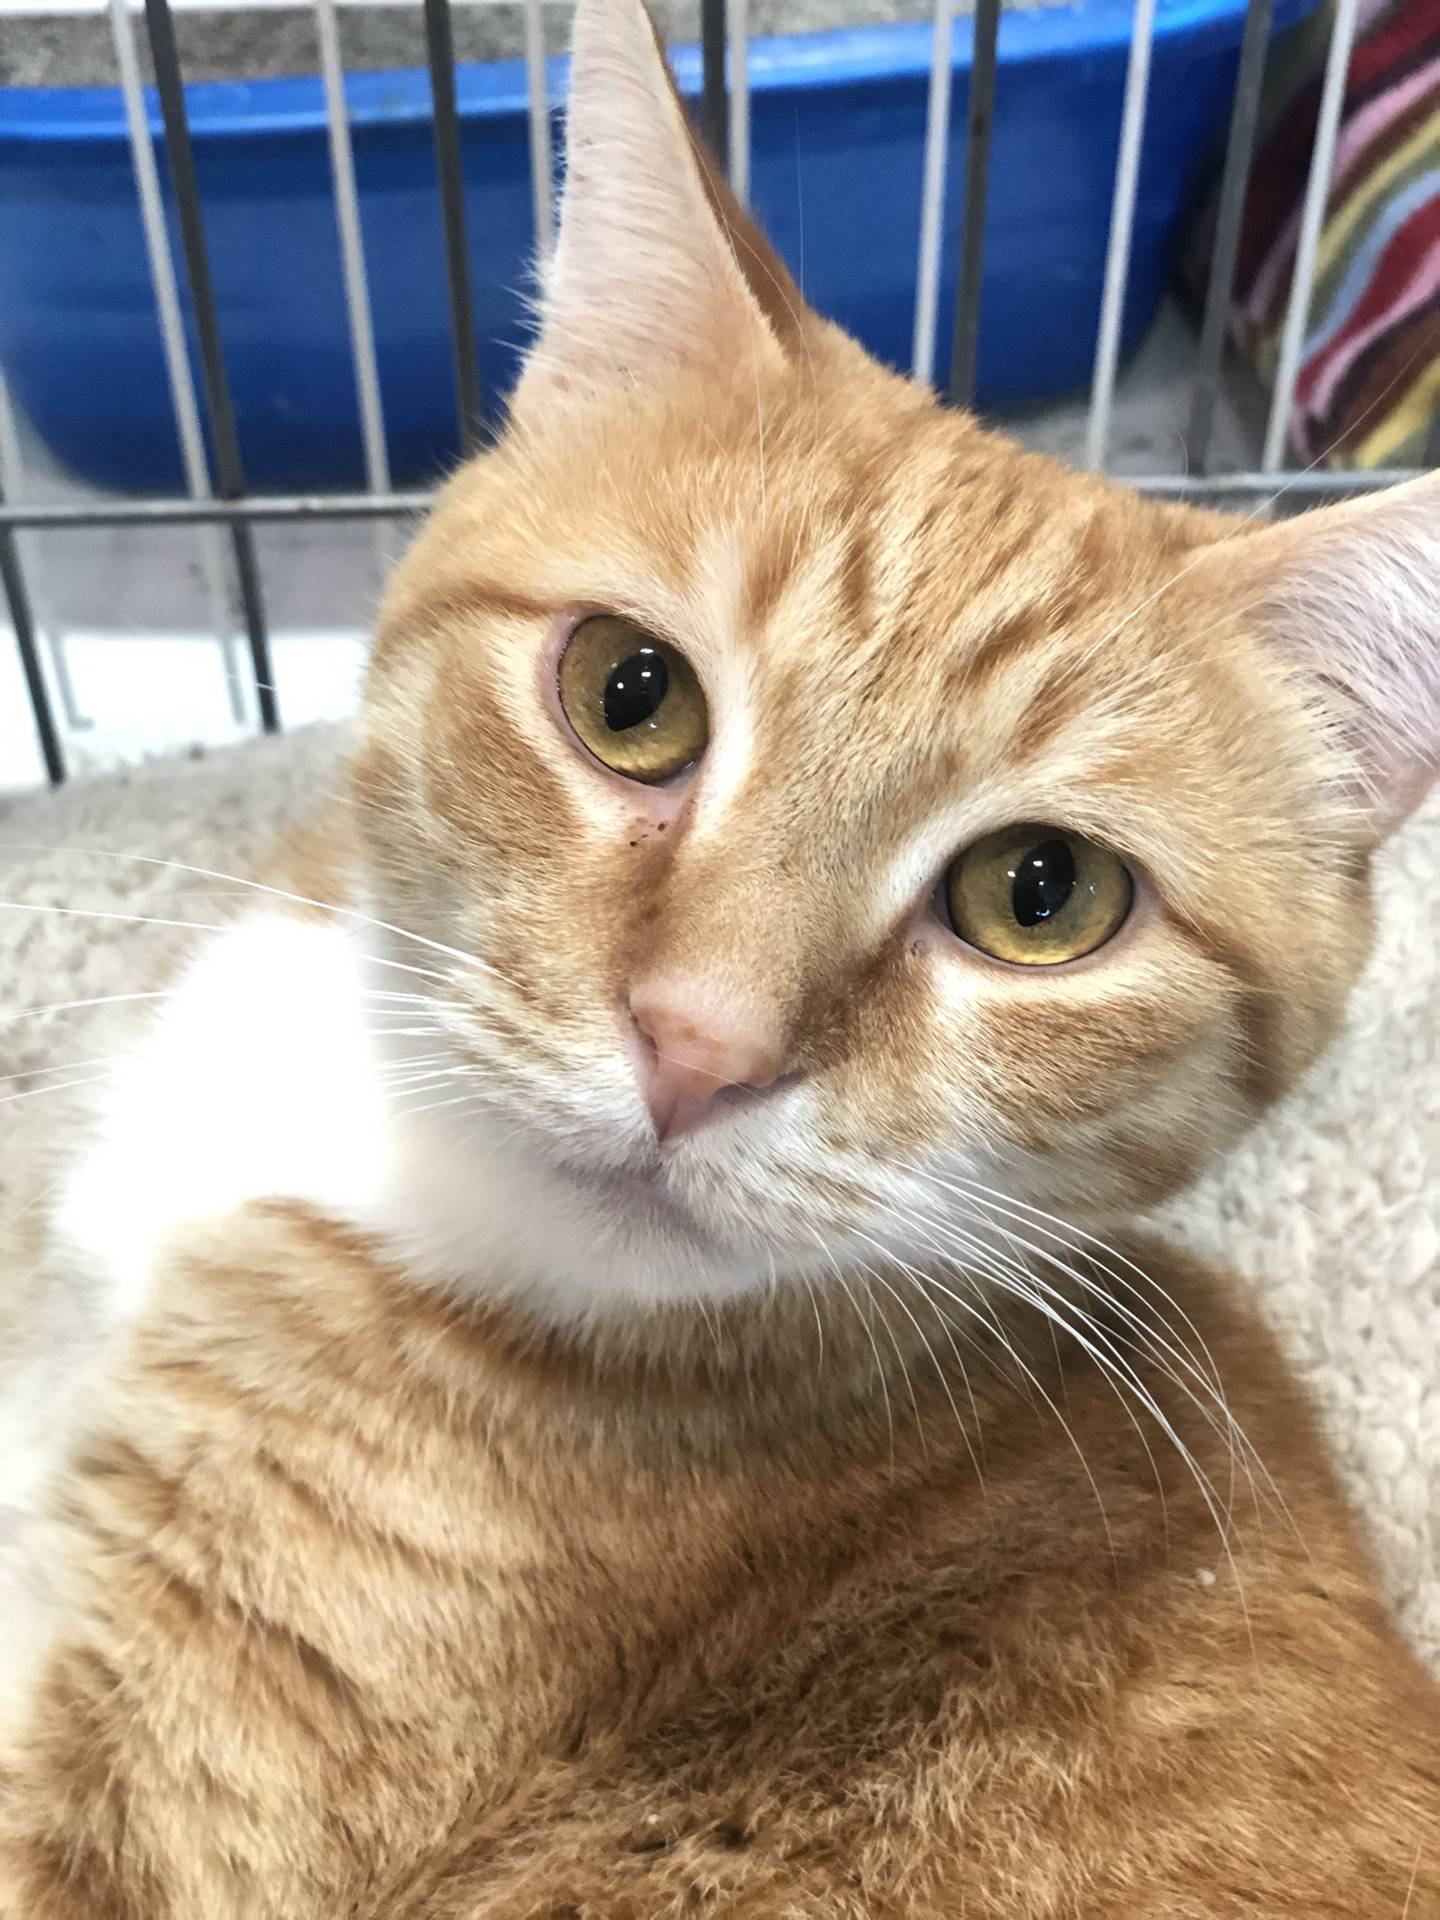 Zing is a 2-year-old orange tabby that is friendly, social, and loves attention. He is easy to hold and enjoys pets, especially chin scratches. He is good with other cats. Zing is a calm, gentle, and will bring a lot of love to a home. To meet Zing, email catadoptions@nawsus.org. Visit nawsus.org.